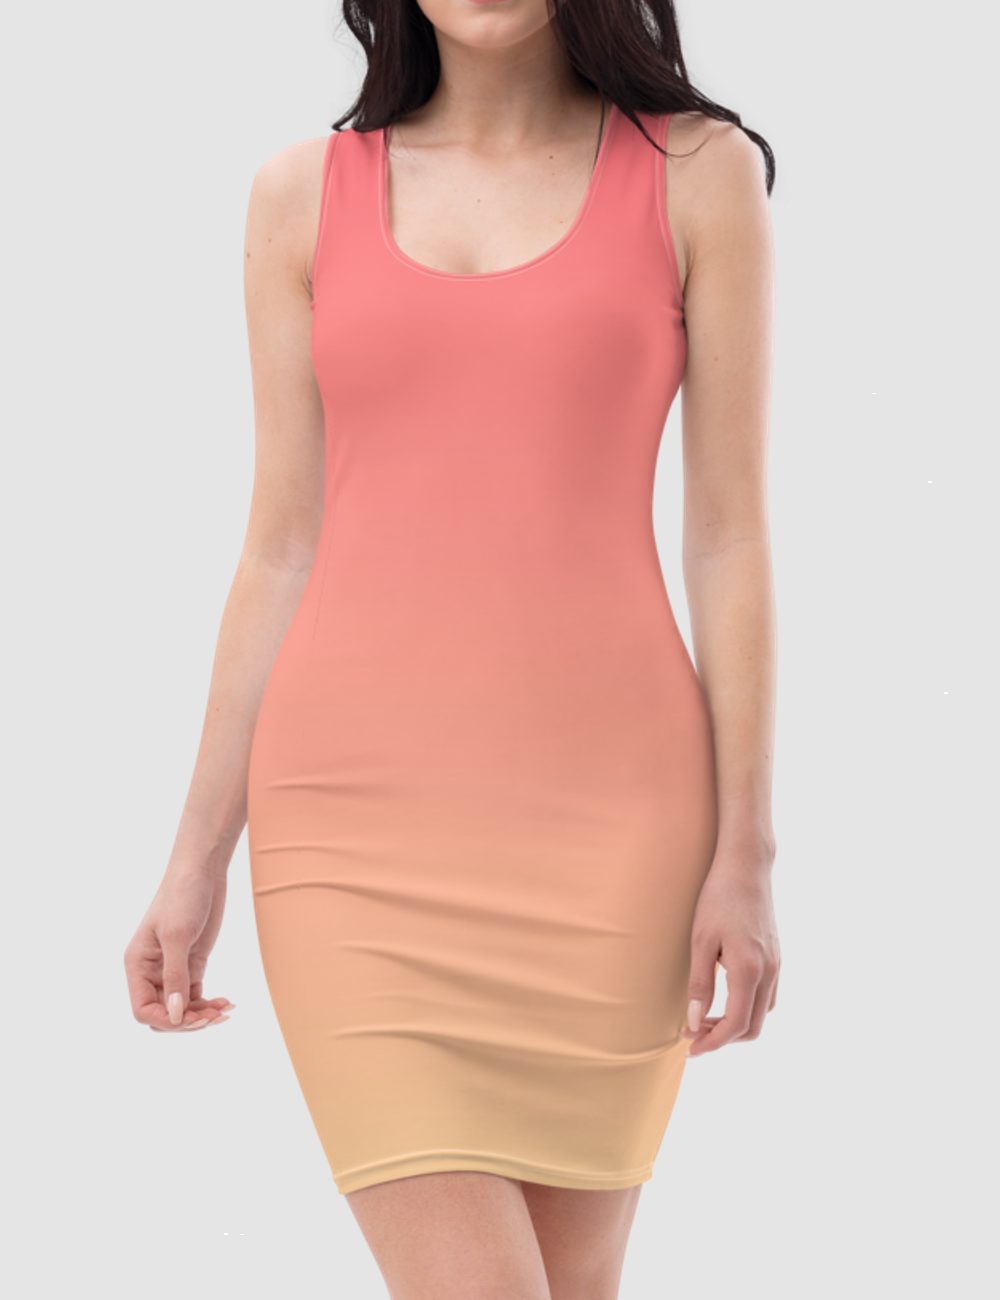 Peach Ombre | Women's Sleeveless Fitted Sublimated Dress OniTakai